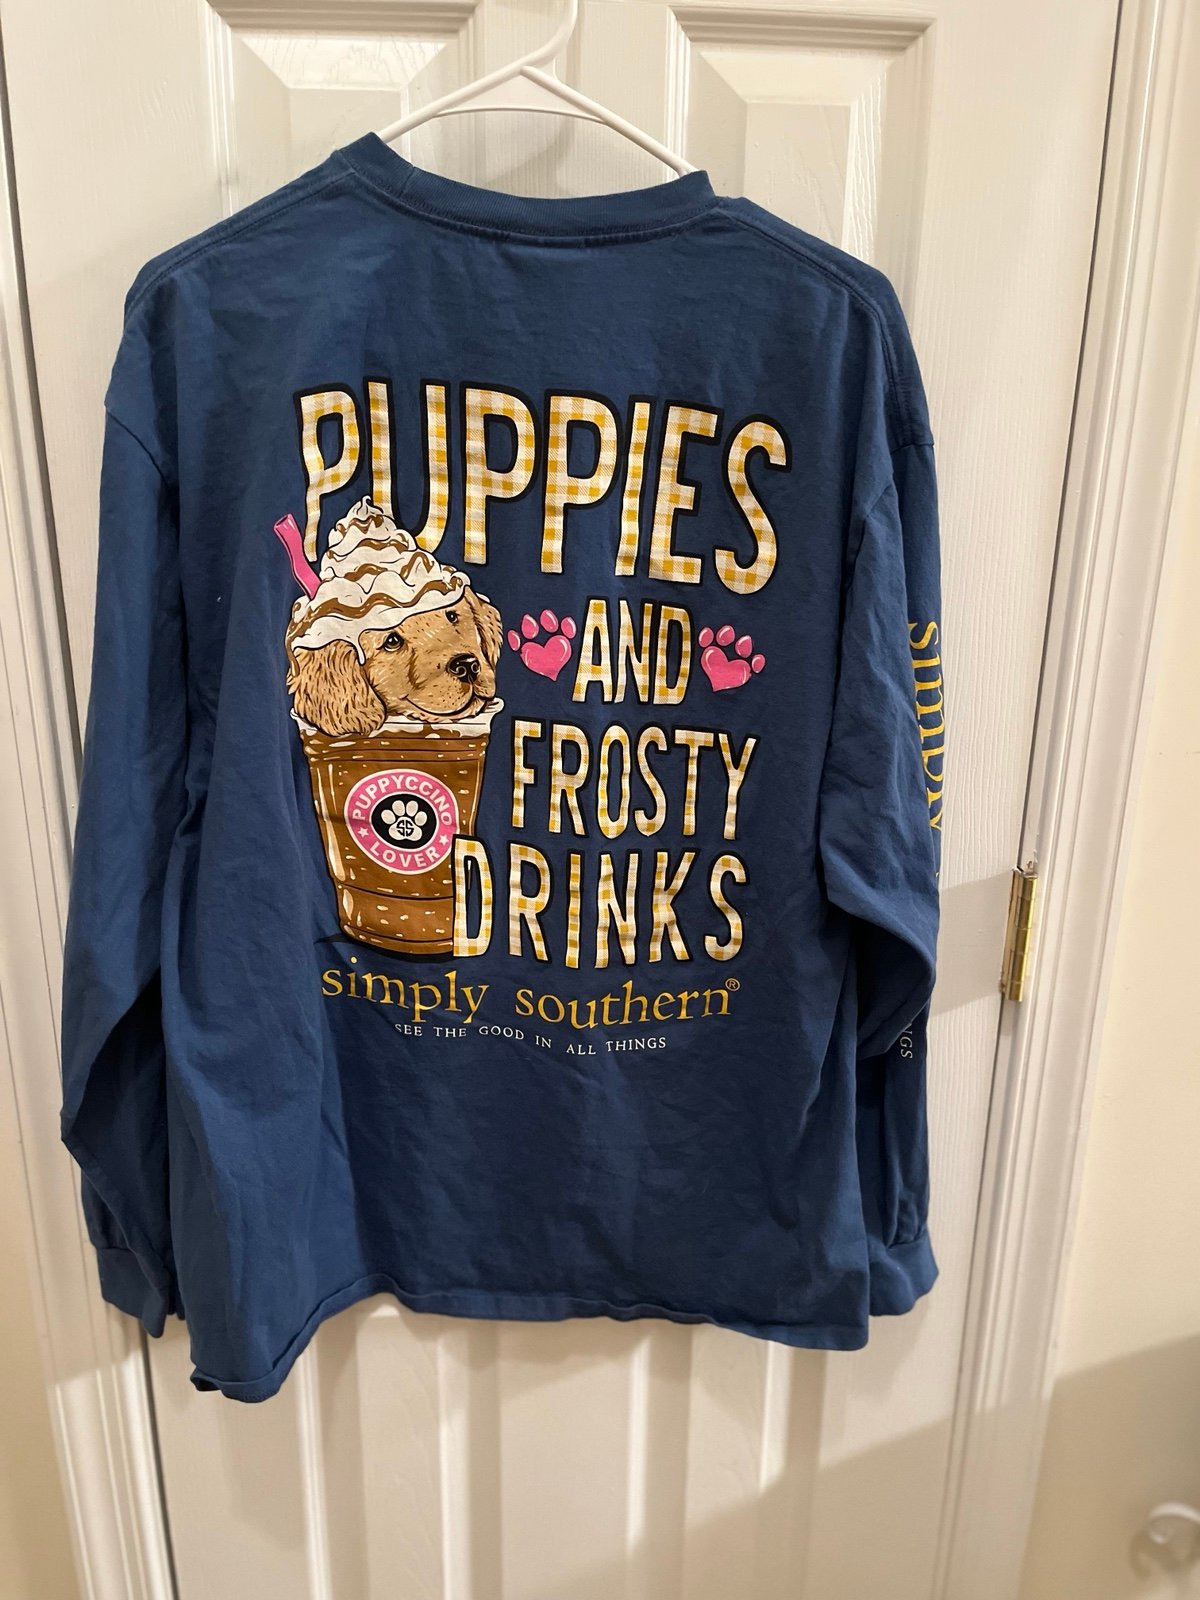 big discount Simply Southern puppies puppies and frosty drinks XL kSBuM7ROF no tax